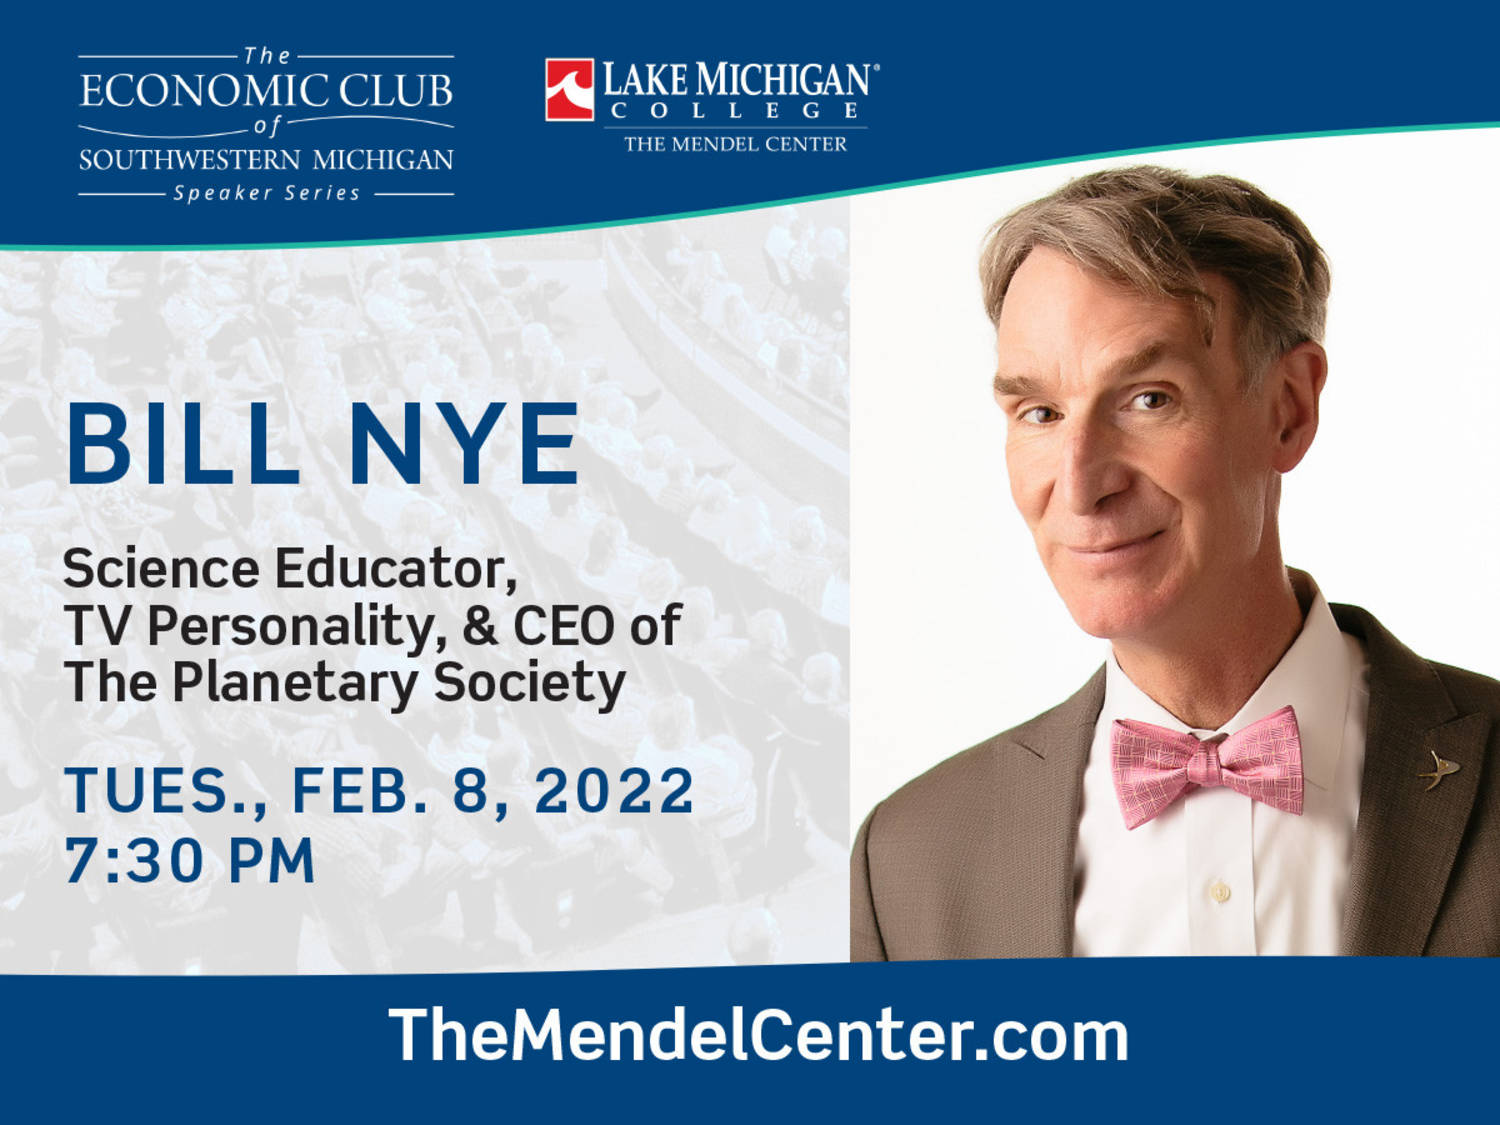 Bill Nye to speak at The Mendel Center Feb. 8 as part of The Economic Club of Southwestern Michigan Speaker Series